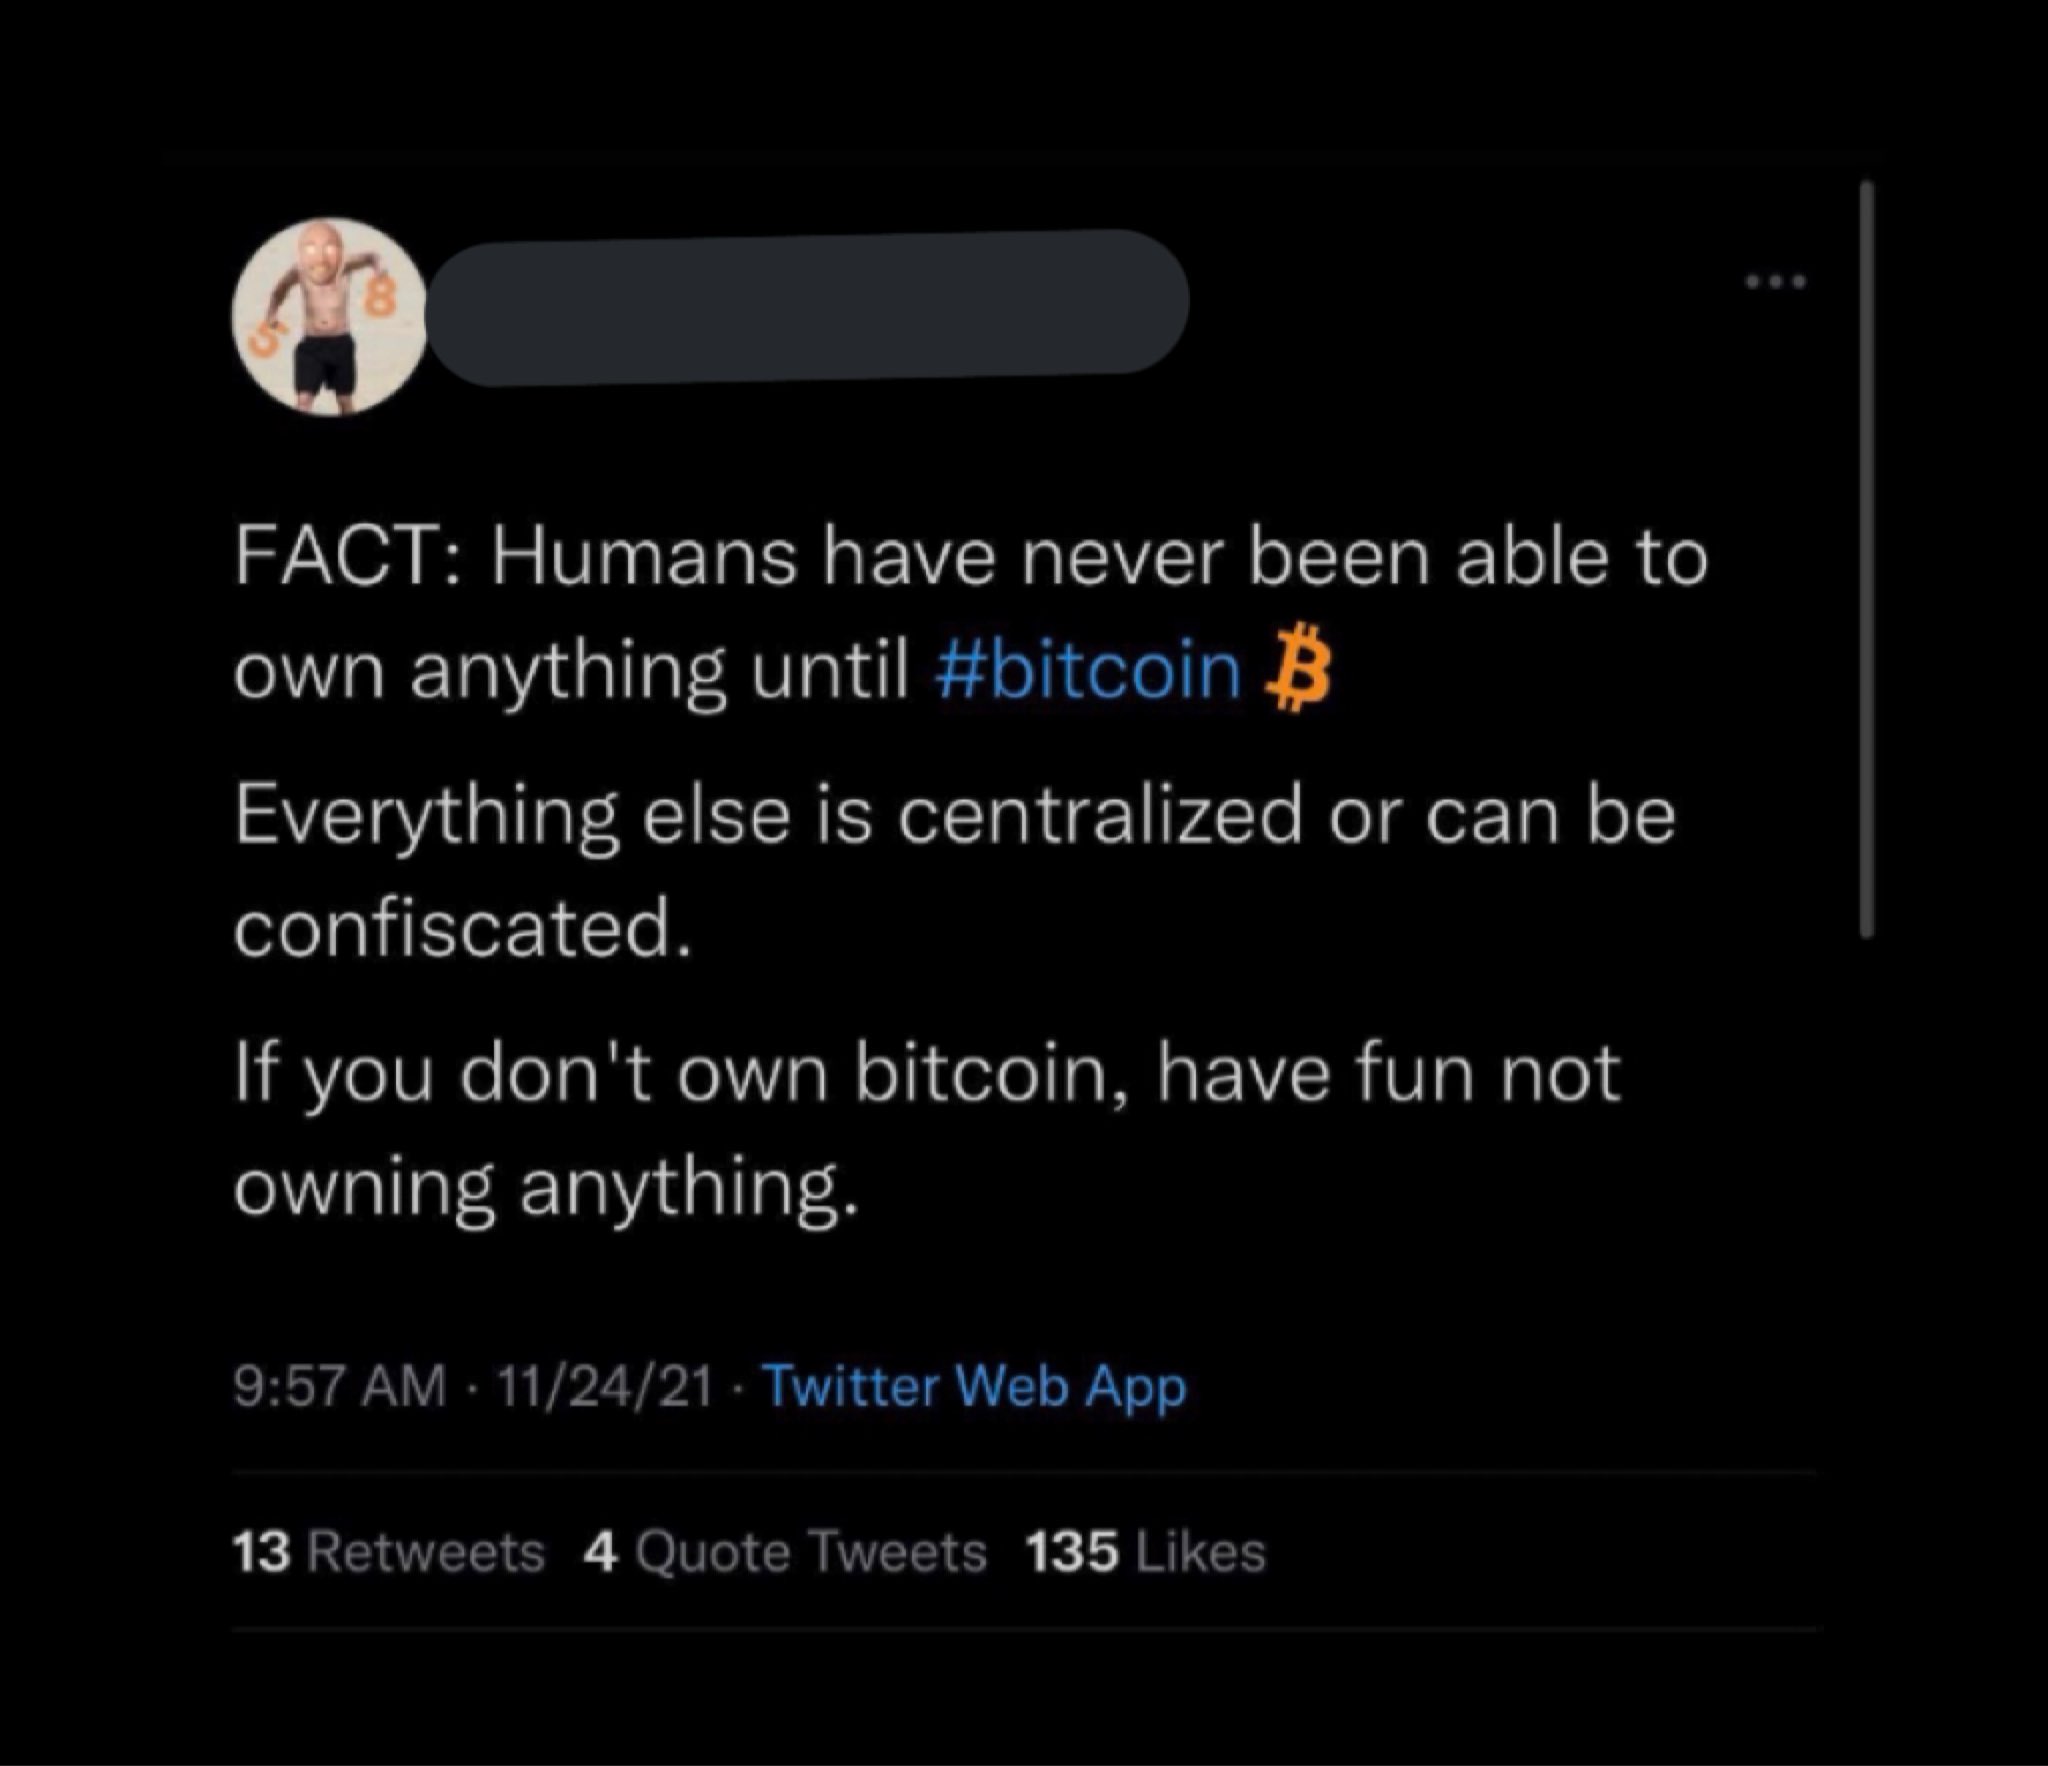 Crypto Bros Posting L's - larry code - Fact Humans have never been able to own anything until B Everything else is centralized or can be confiscated. If you don't own bitcoin, have fun not owning anything. 112421 Twitter Web App 13 4 Quote Tweets 135